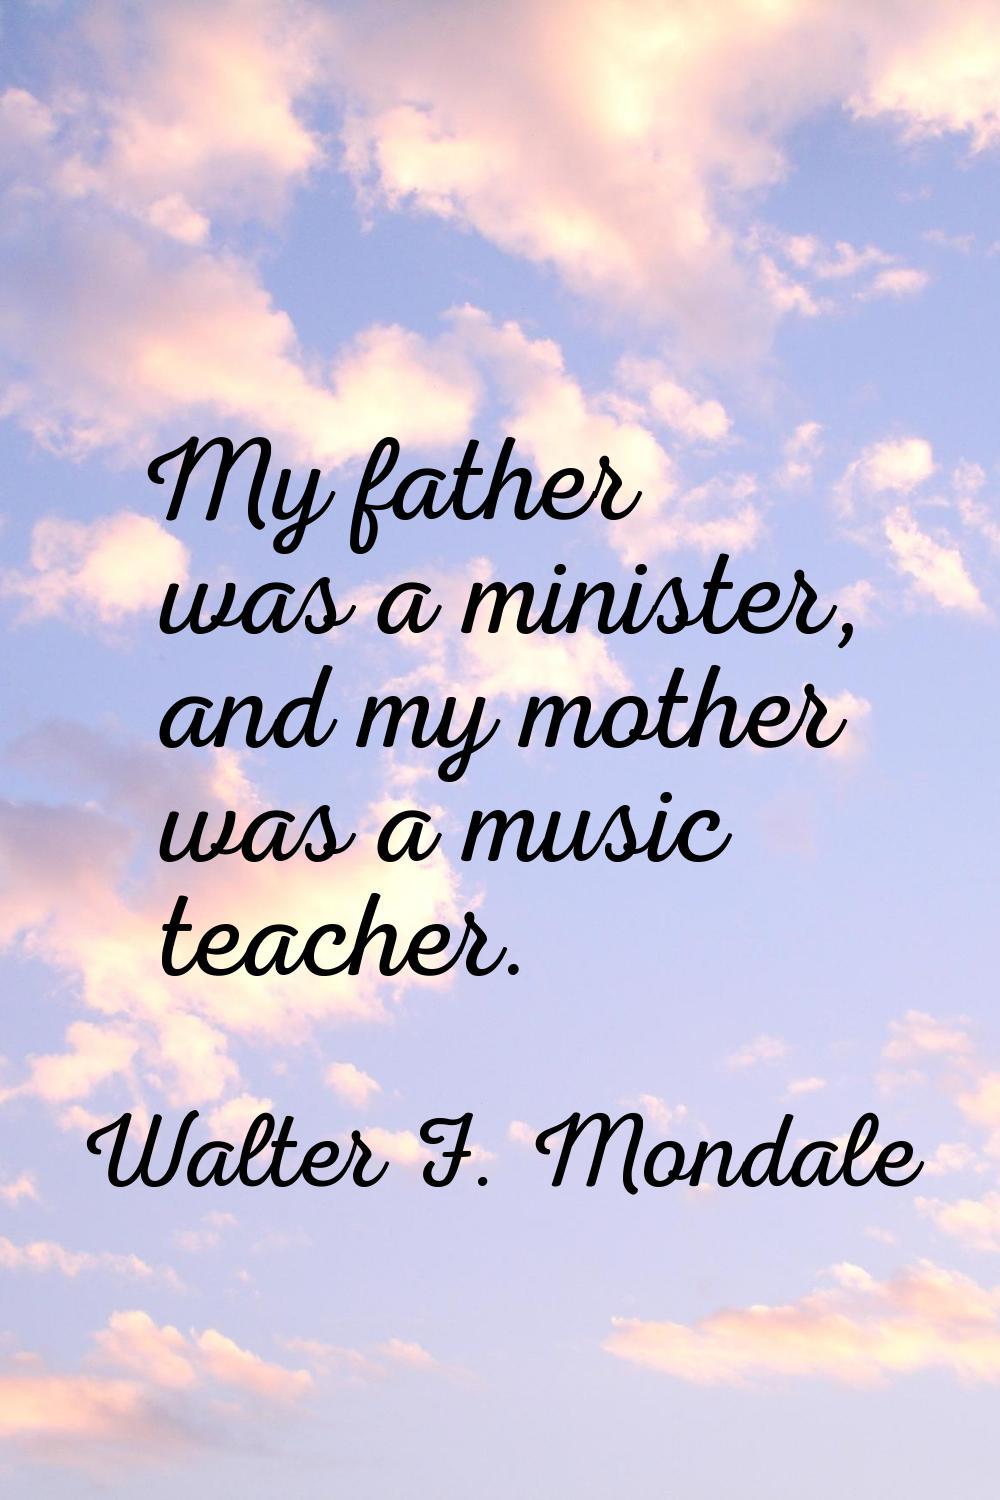 My father was a minister, and my mother was a music teacher.